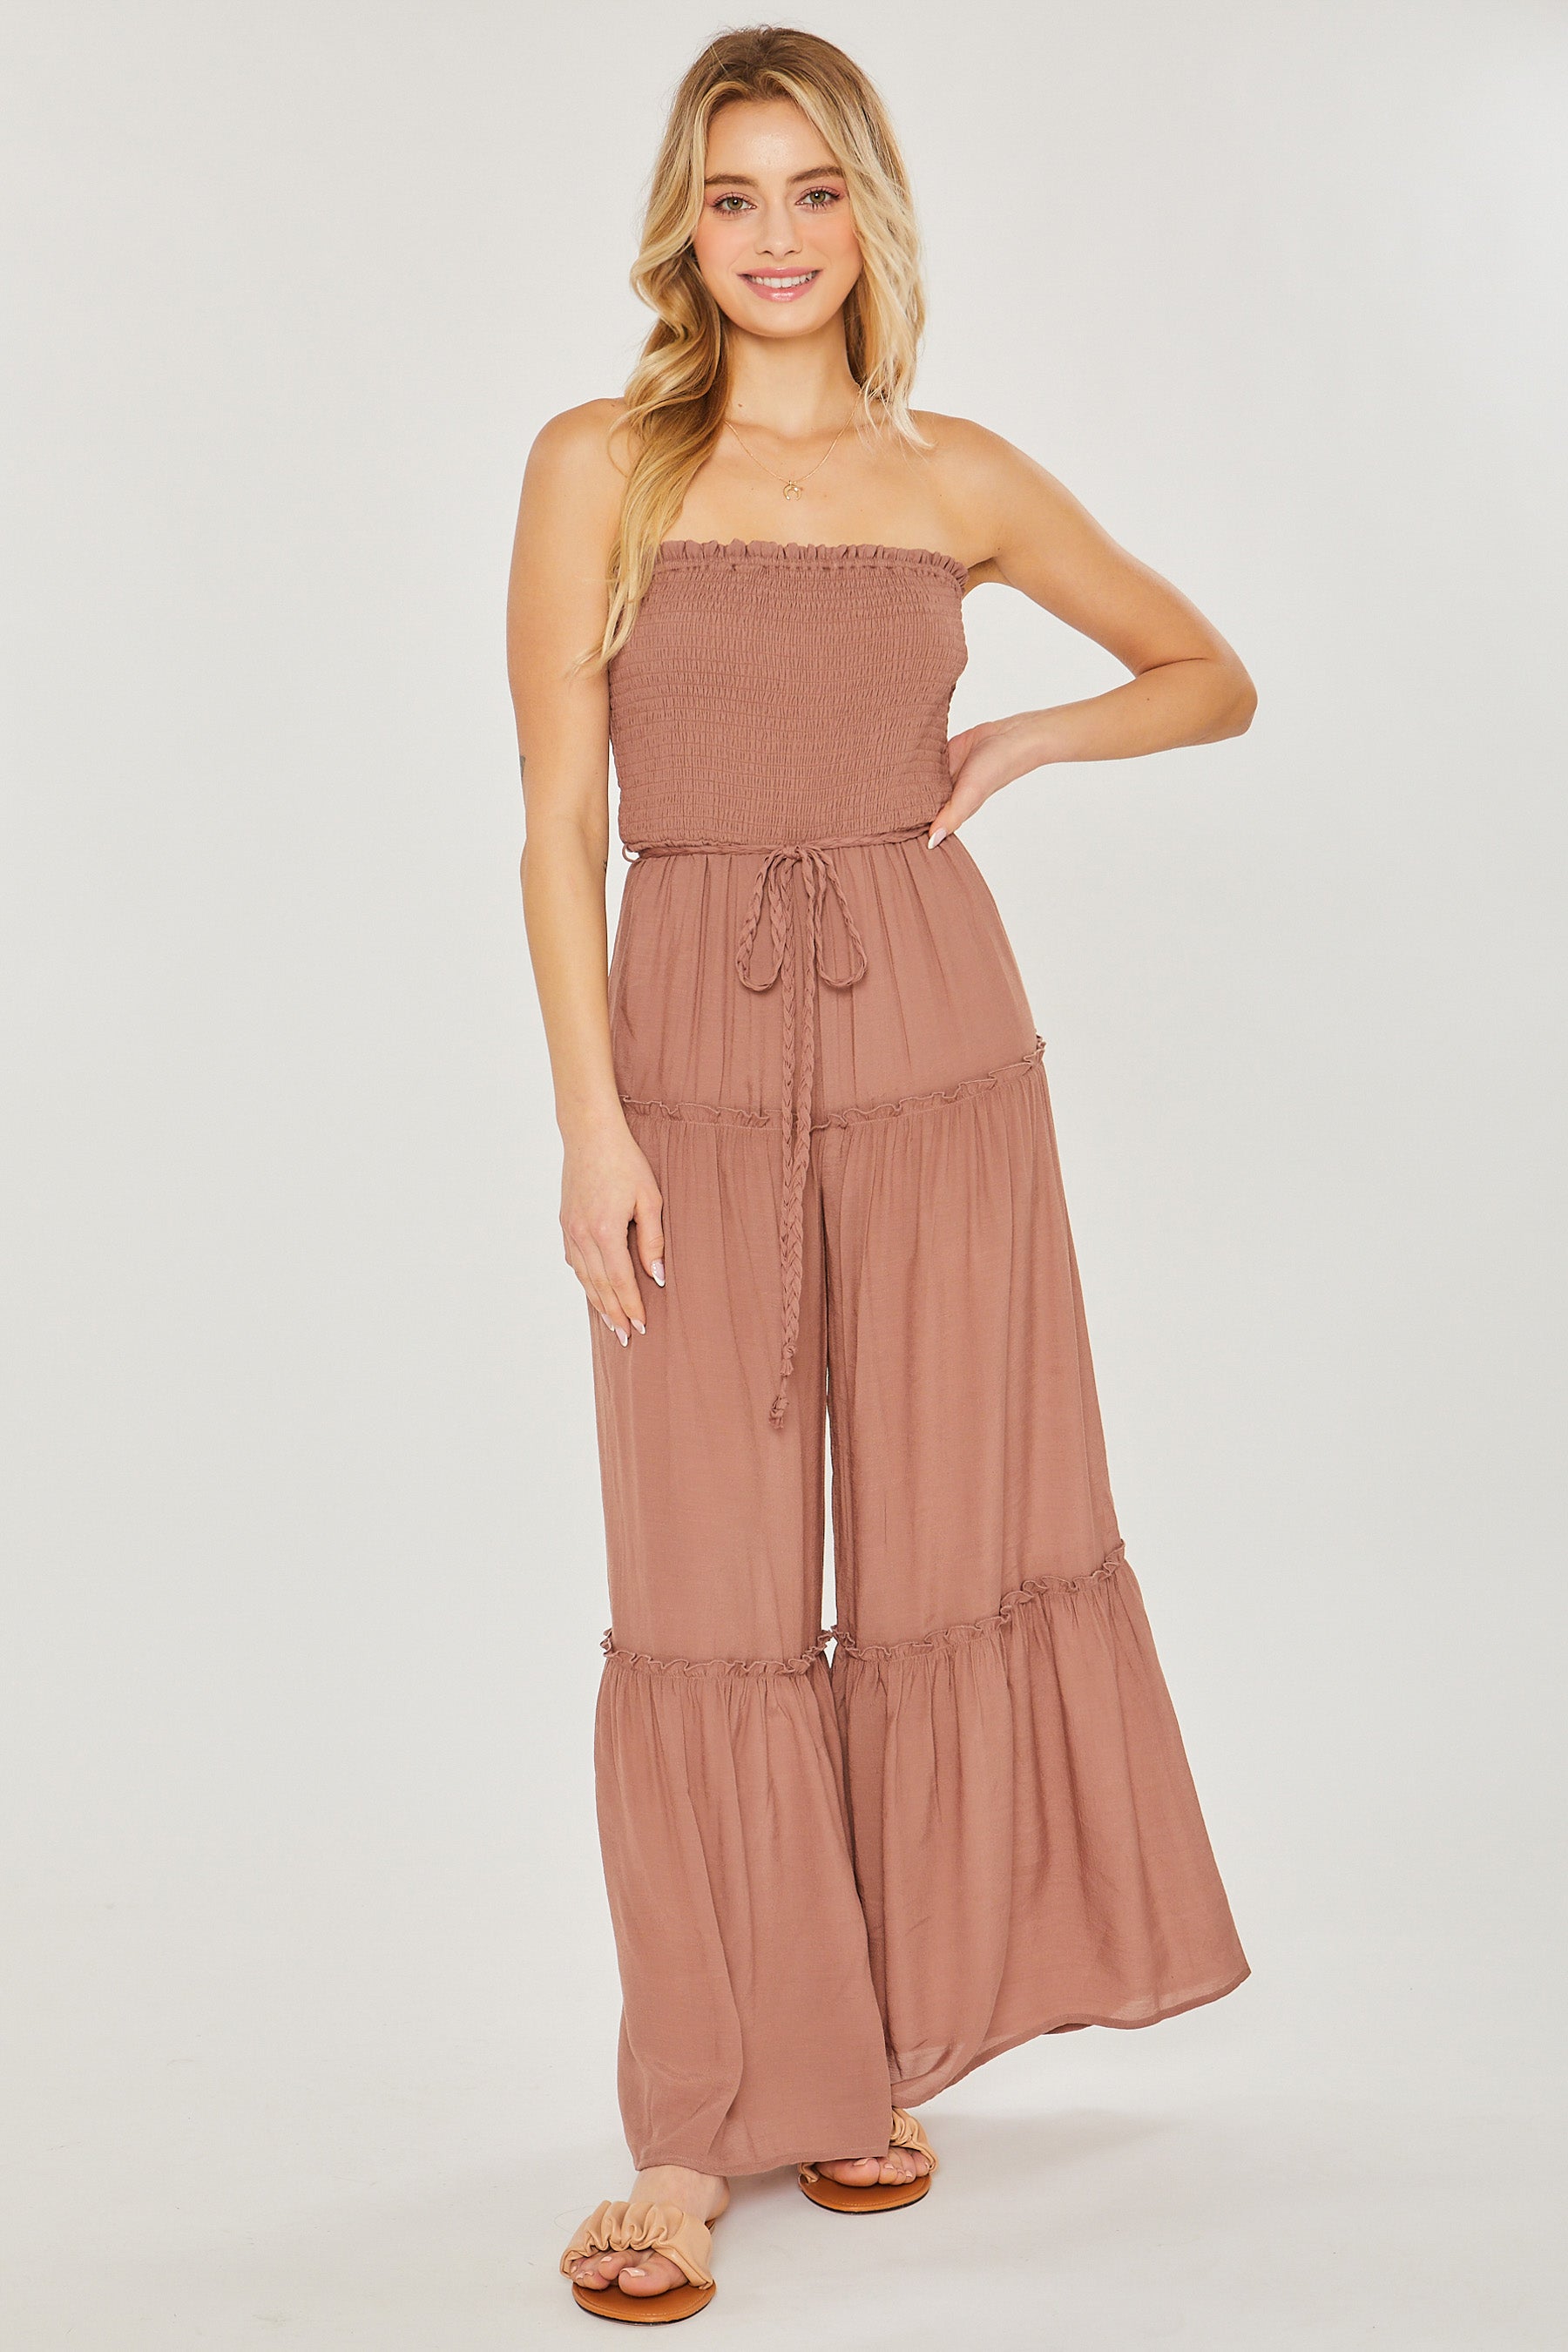 - Dainty Sleeveless Smocked Ruffle Jumpsuit- 4 colors - Ships from The US - womens jumpsuit at TFC&H Co.